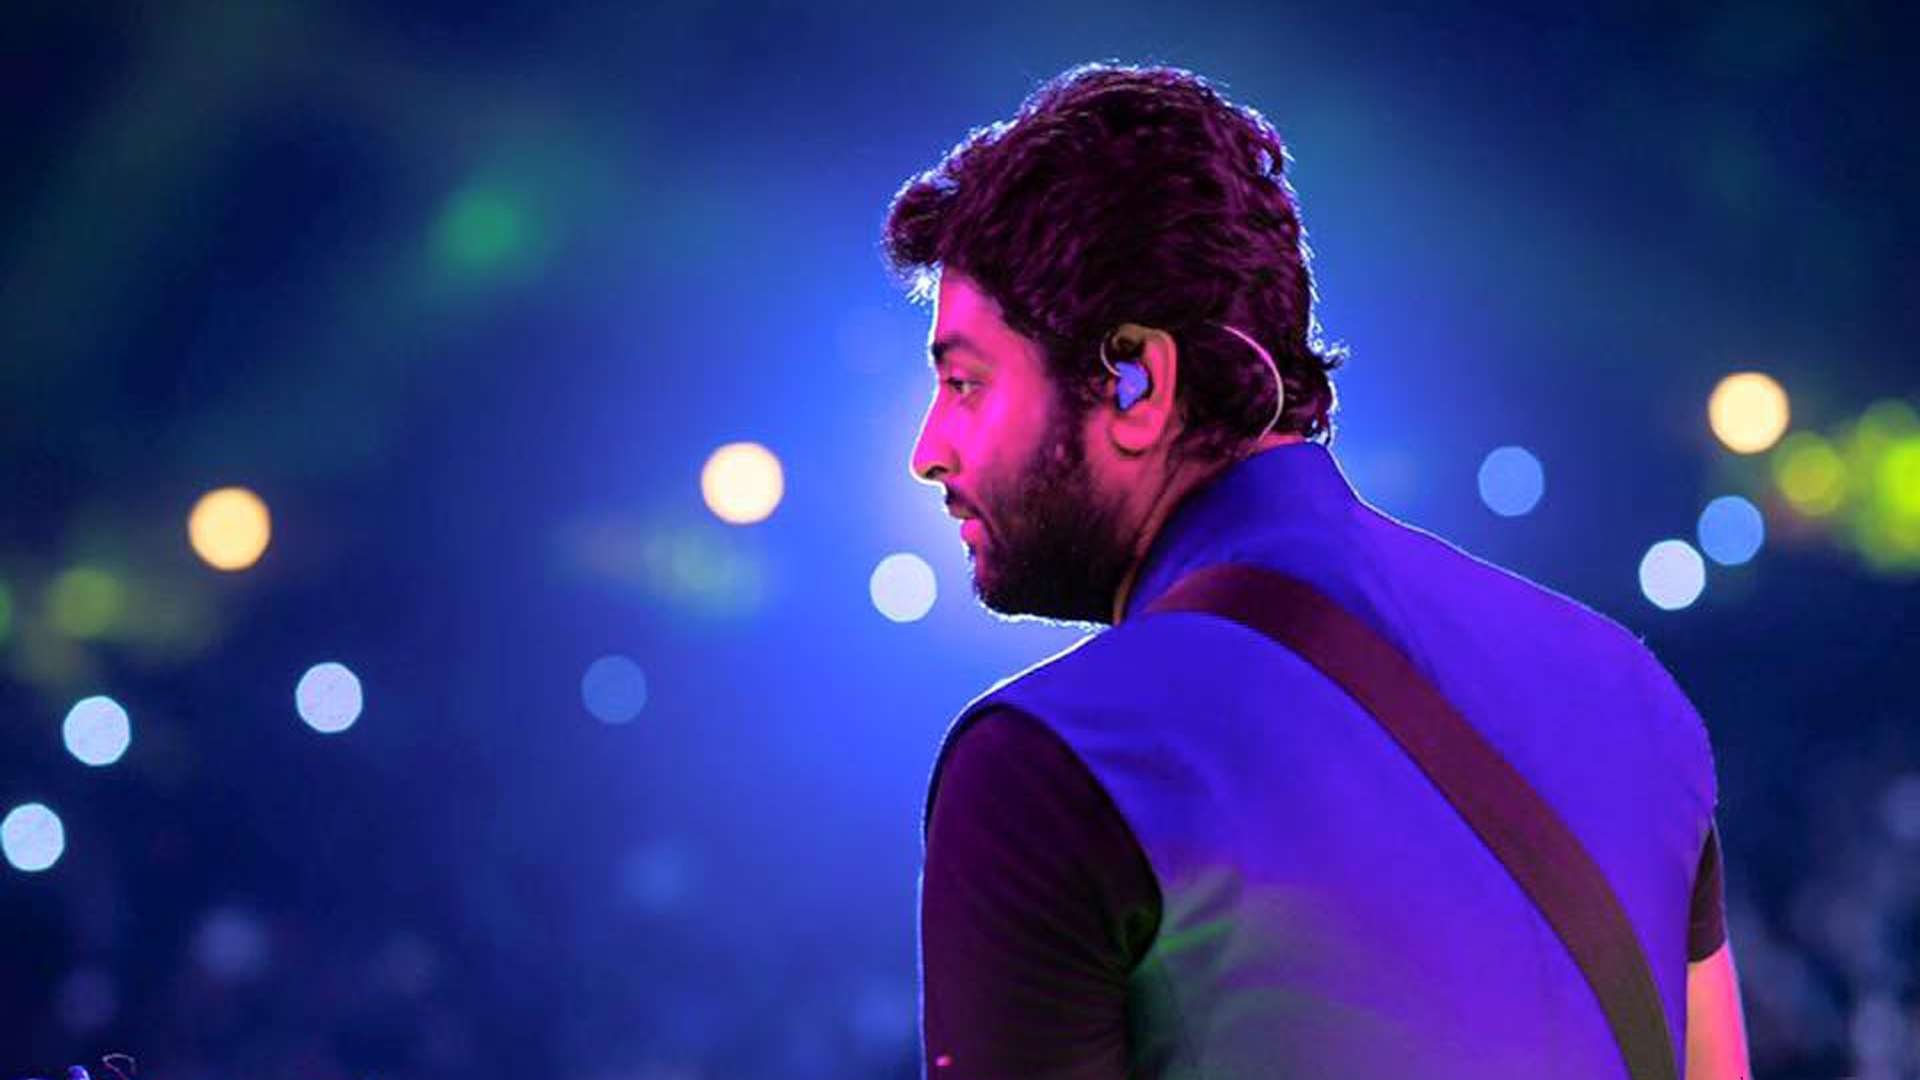 Arjit Singh – One of the Best Indian Singer and Composer